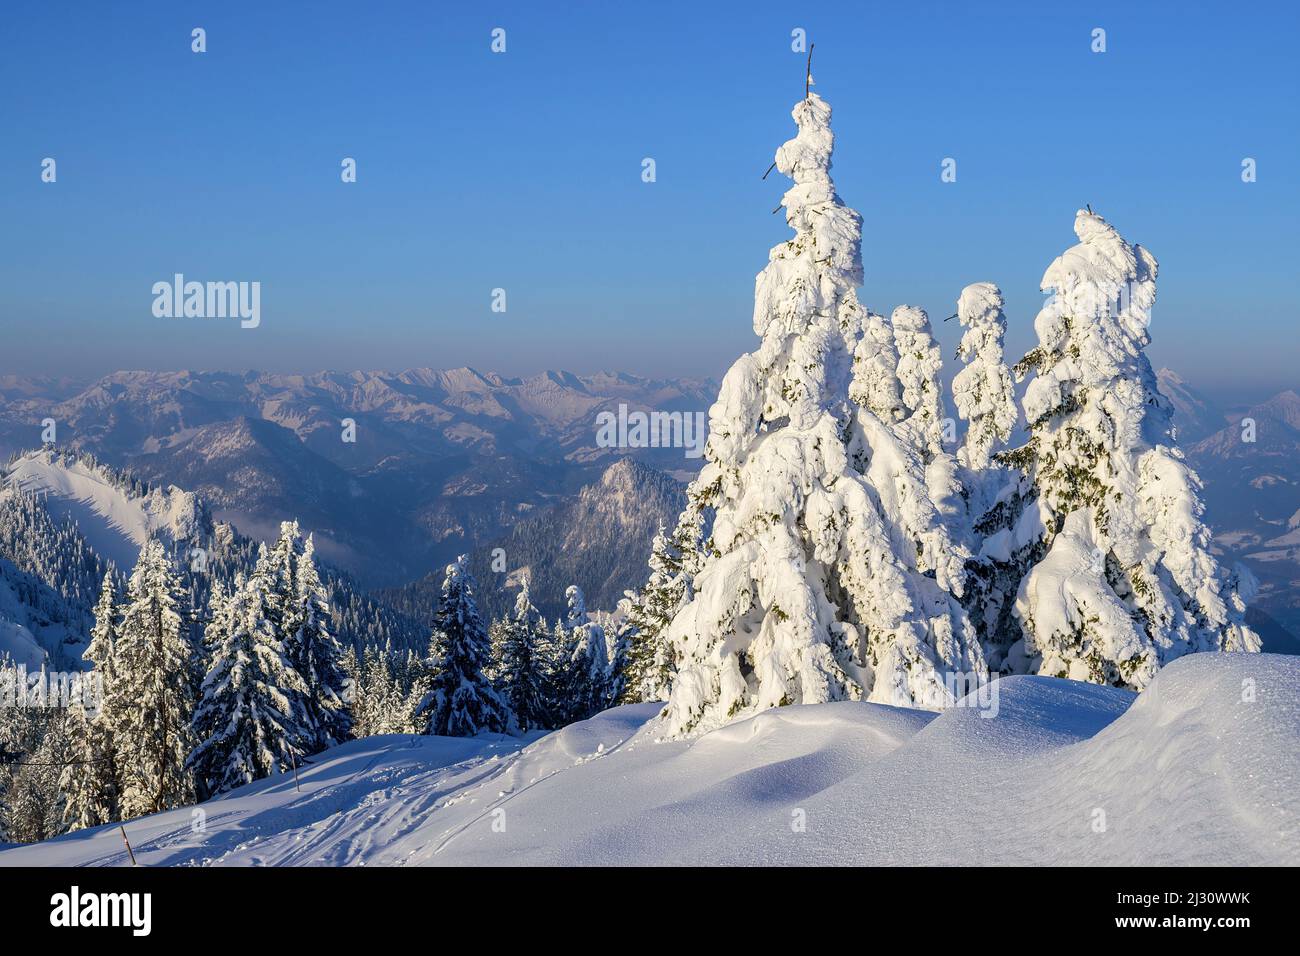 Snow-covered spruce trees with Bavarian Alps in the background, Hochries, Chiemgau Alps, Upper Bavaria, Bavaria, Germany Stock Photo